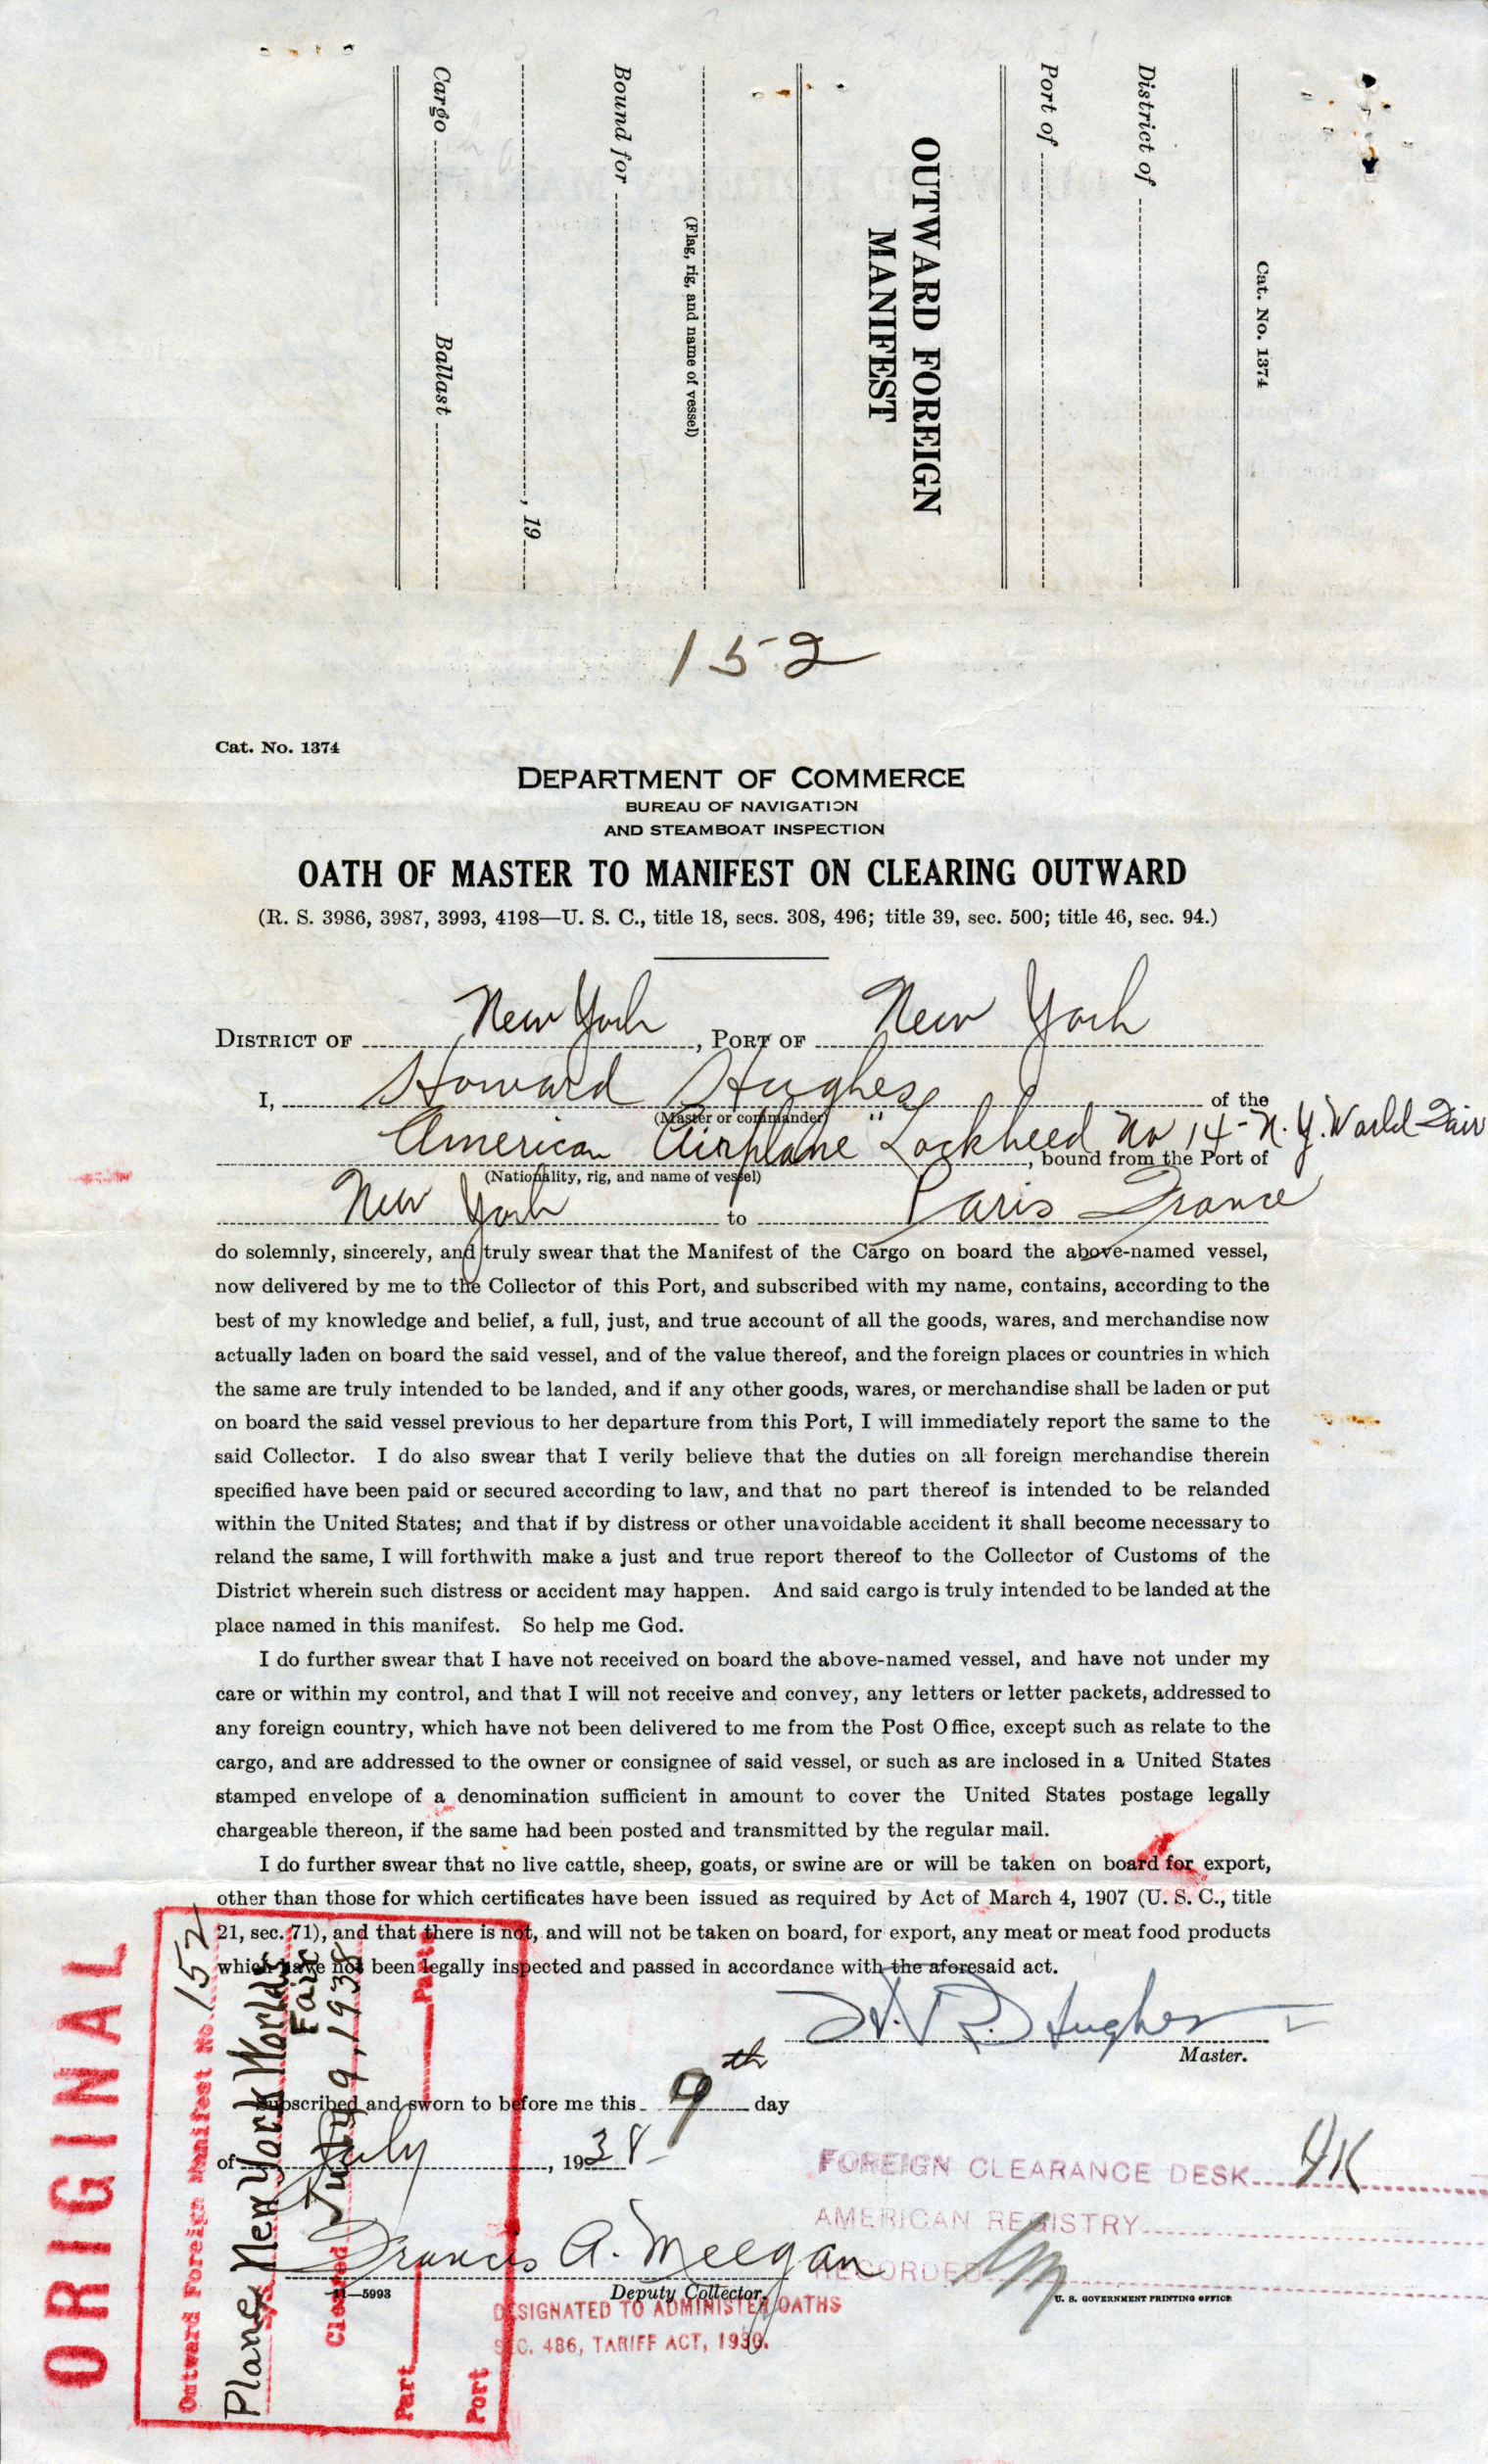 Manifest No. 152 was issued on July 9, 1938 for Howard Hughes, whose signature appears as Master. The full name of the plane was "New York World's Fair 1939." Grover Whalen, president of the Fair, backed the trip as a way to invite other nations to participate. Rumors of the flight hit the newspapers over a week before, with reports that the Department of Commerce granted Hughes a permit from New York to Paris.